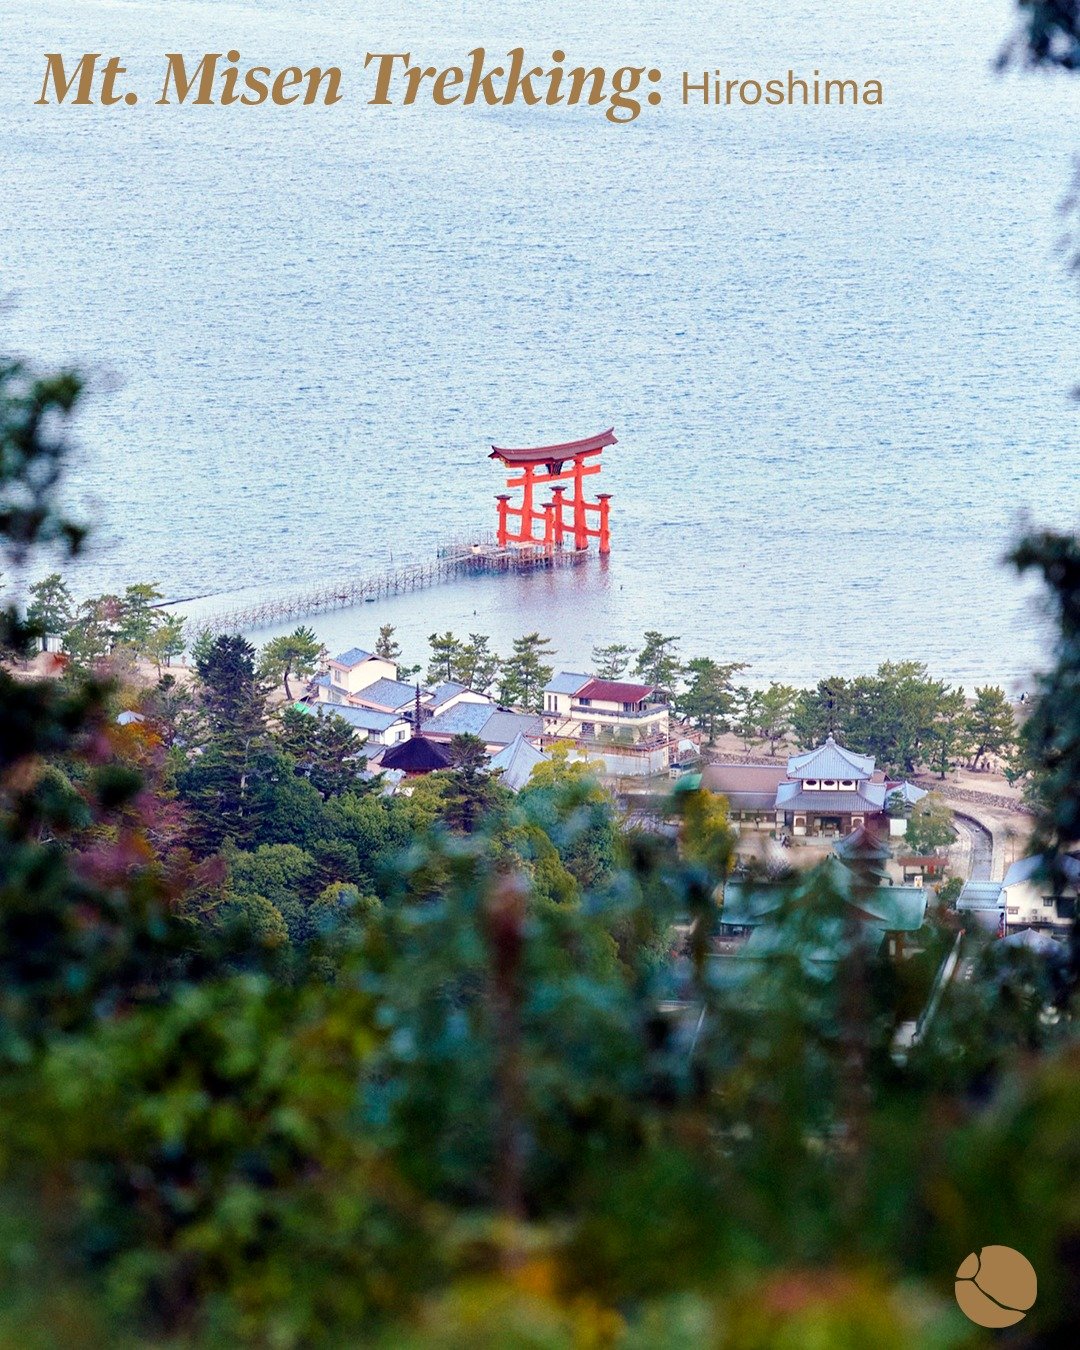 Breathe in the sacred air of nature on Mt. Misen, located on an island designated as a UNESCO World Heritage Site. 

Hike through primeval forests, past the famous floating torii gates of Itsukishima Shrine, and observe the stunning, sweeping views o